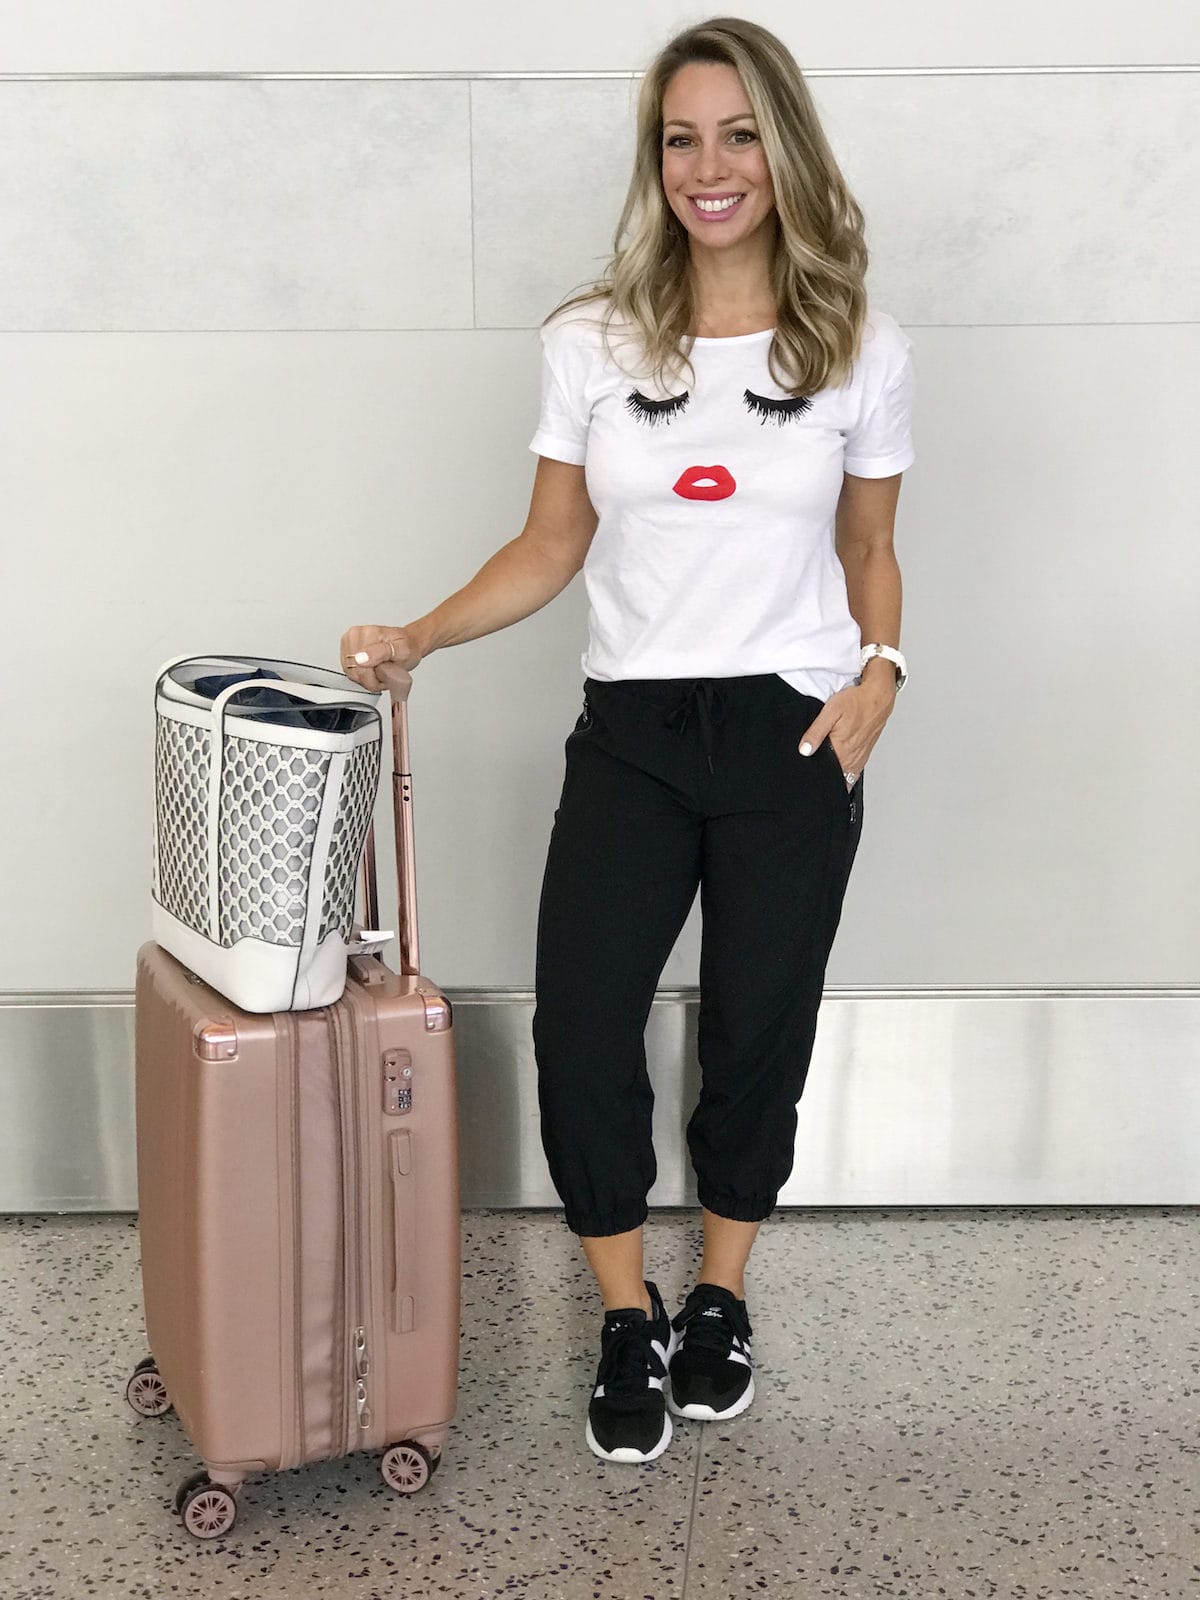 Amazon Fashion Prime Day Haul - Comfy travel outfit- crop joggers and eyelash tee